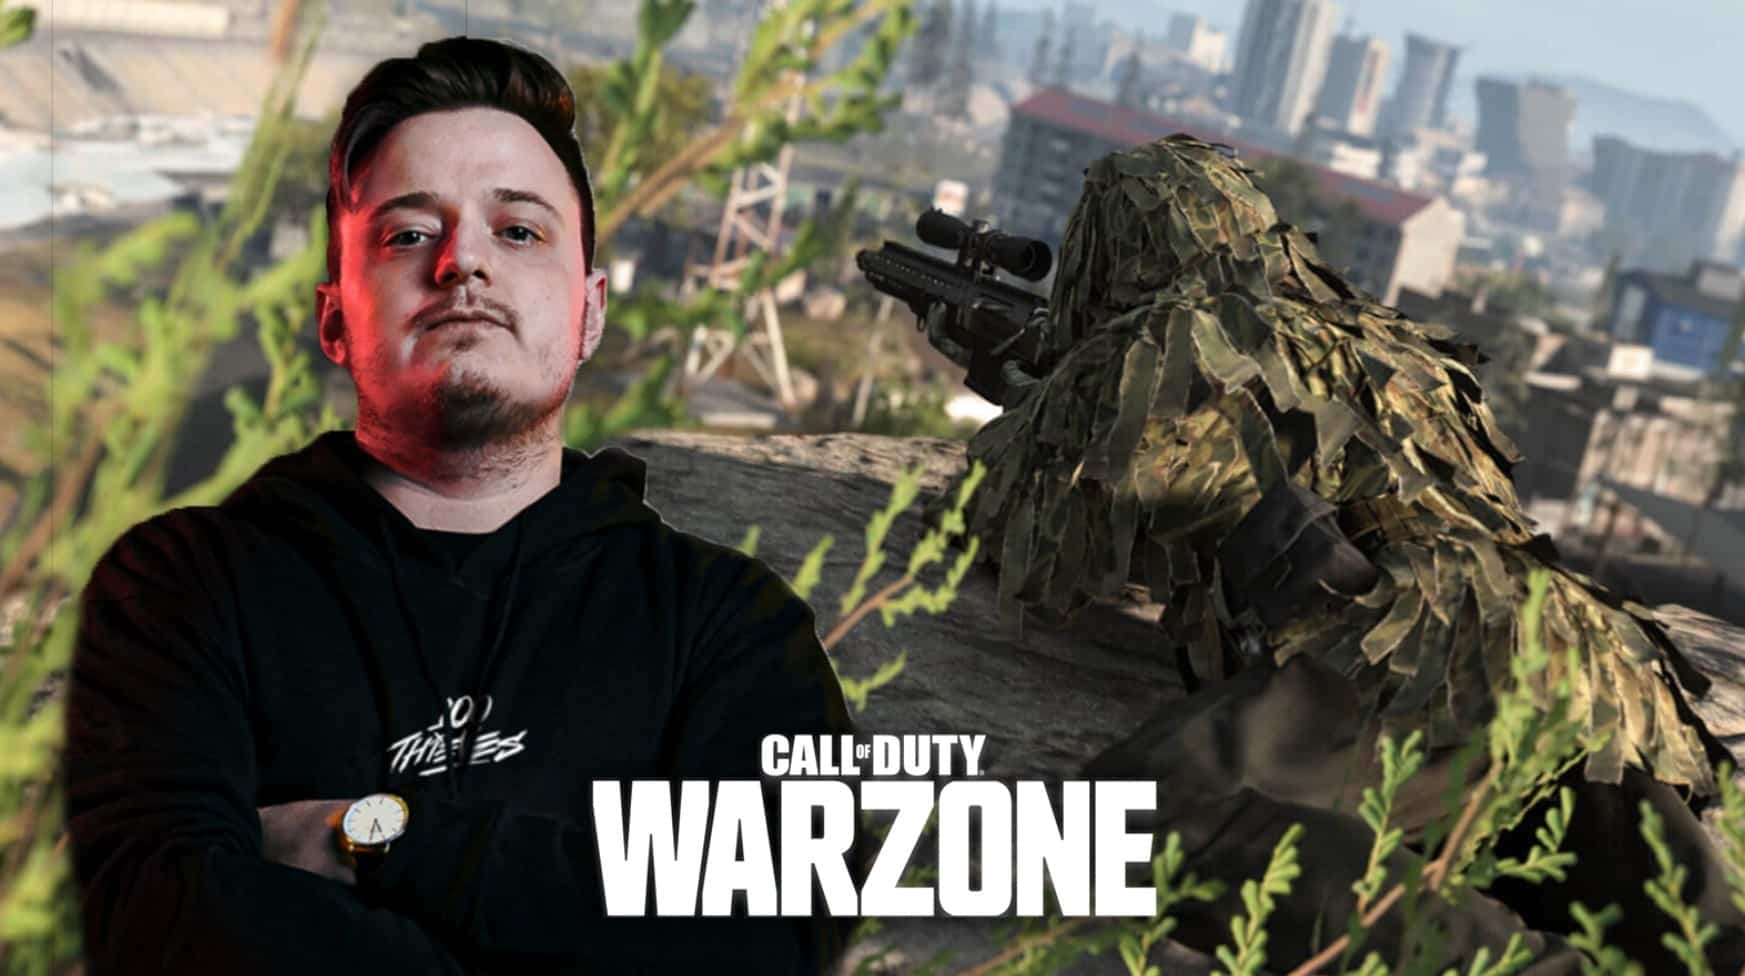 Tommey playing Warzone